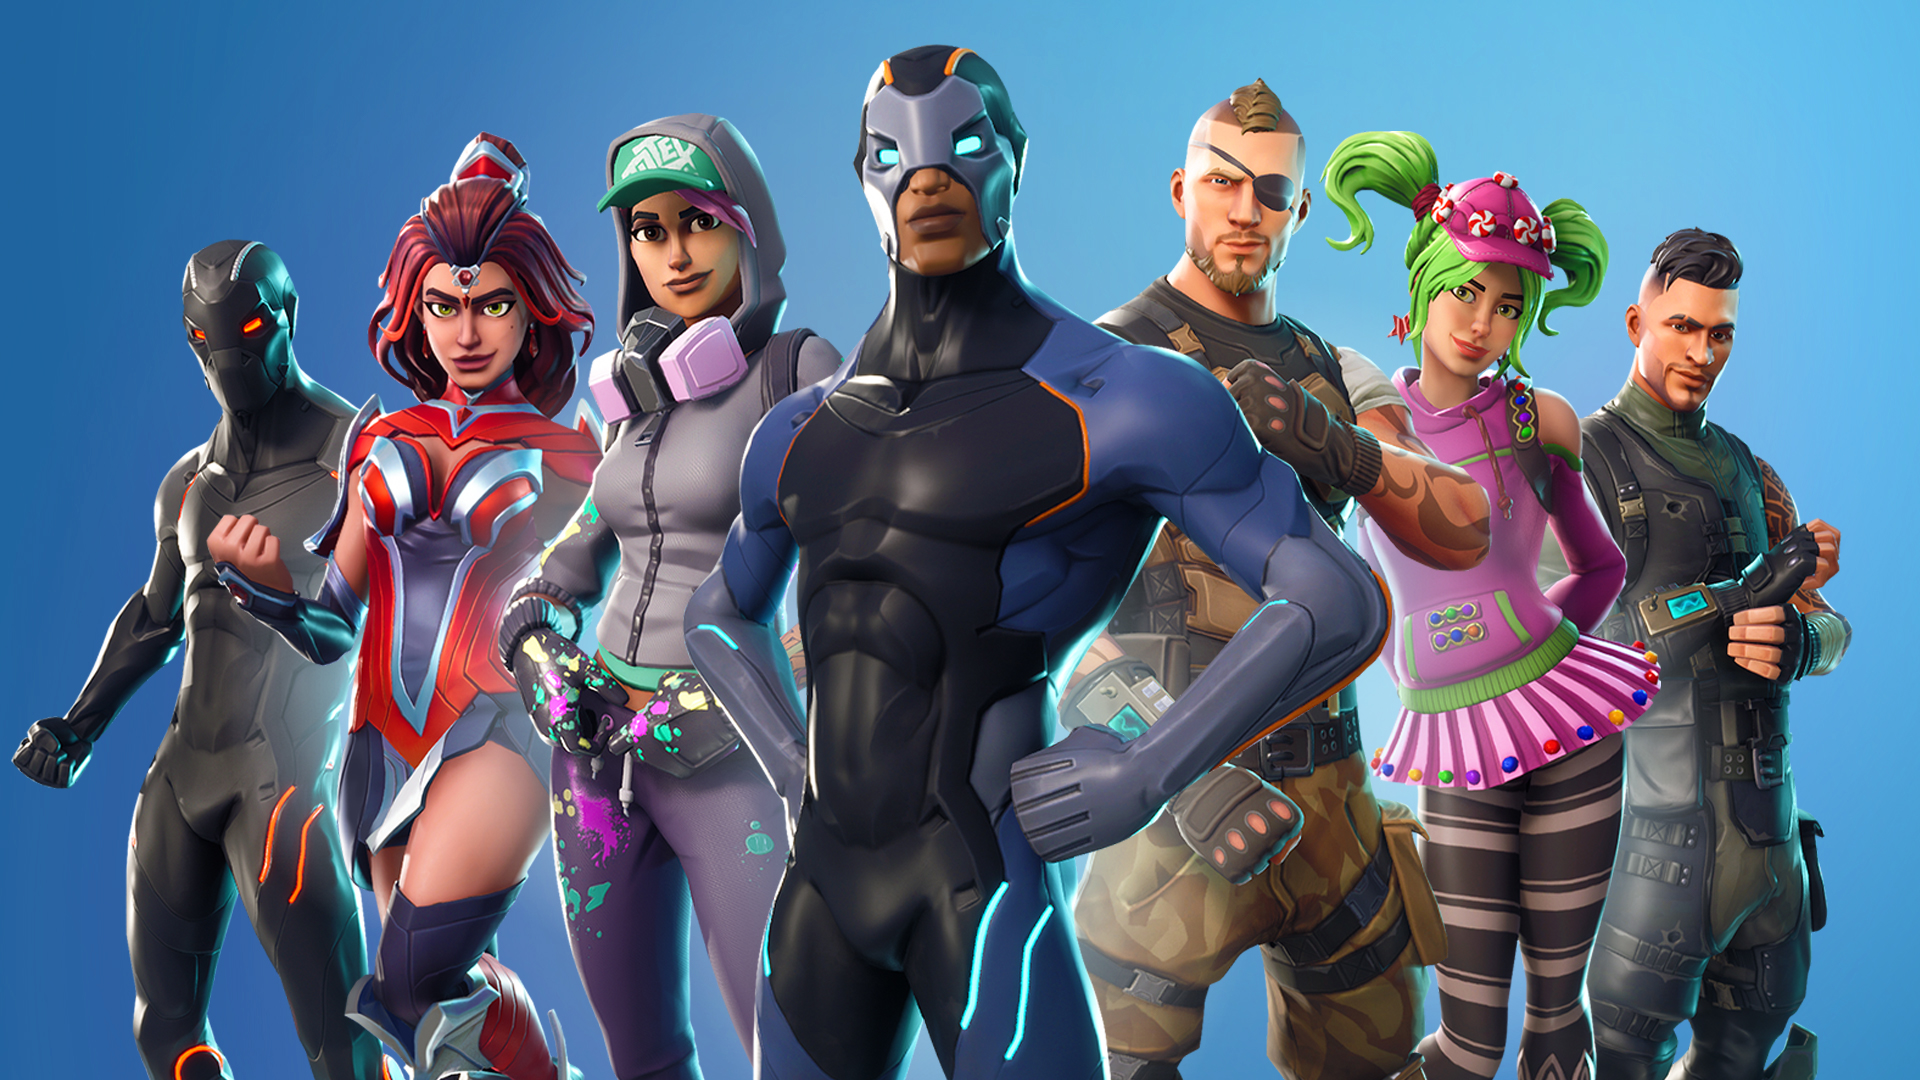 Poll: 'Fortnite' Players Spend An Average Of Nearly $85 On Cosmetics